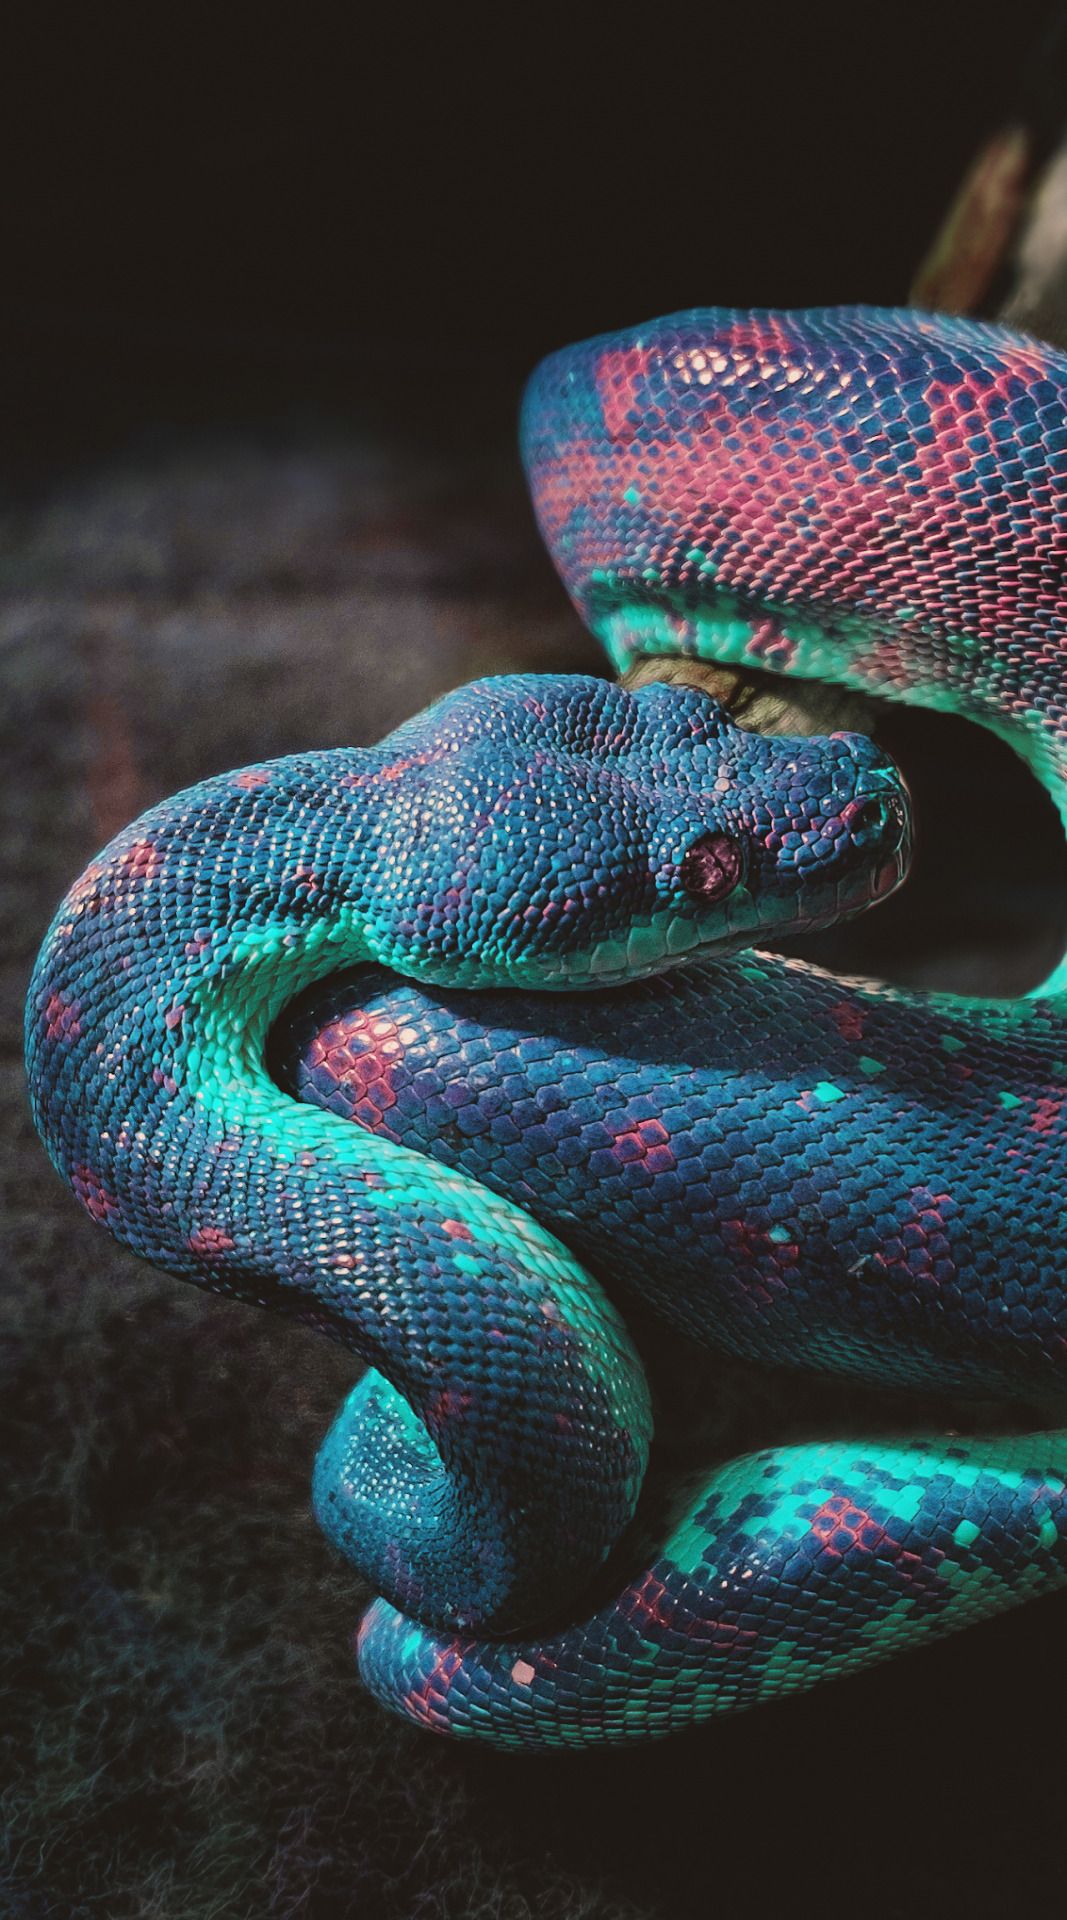 Snakes Call You Babe - HD Wallpaper 